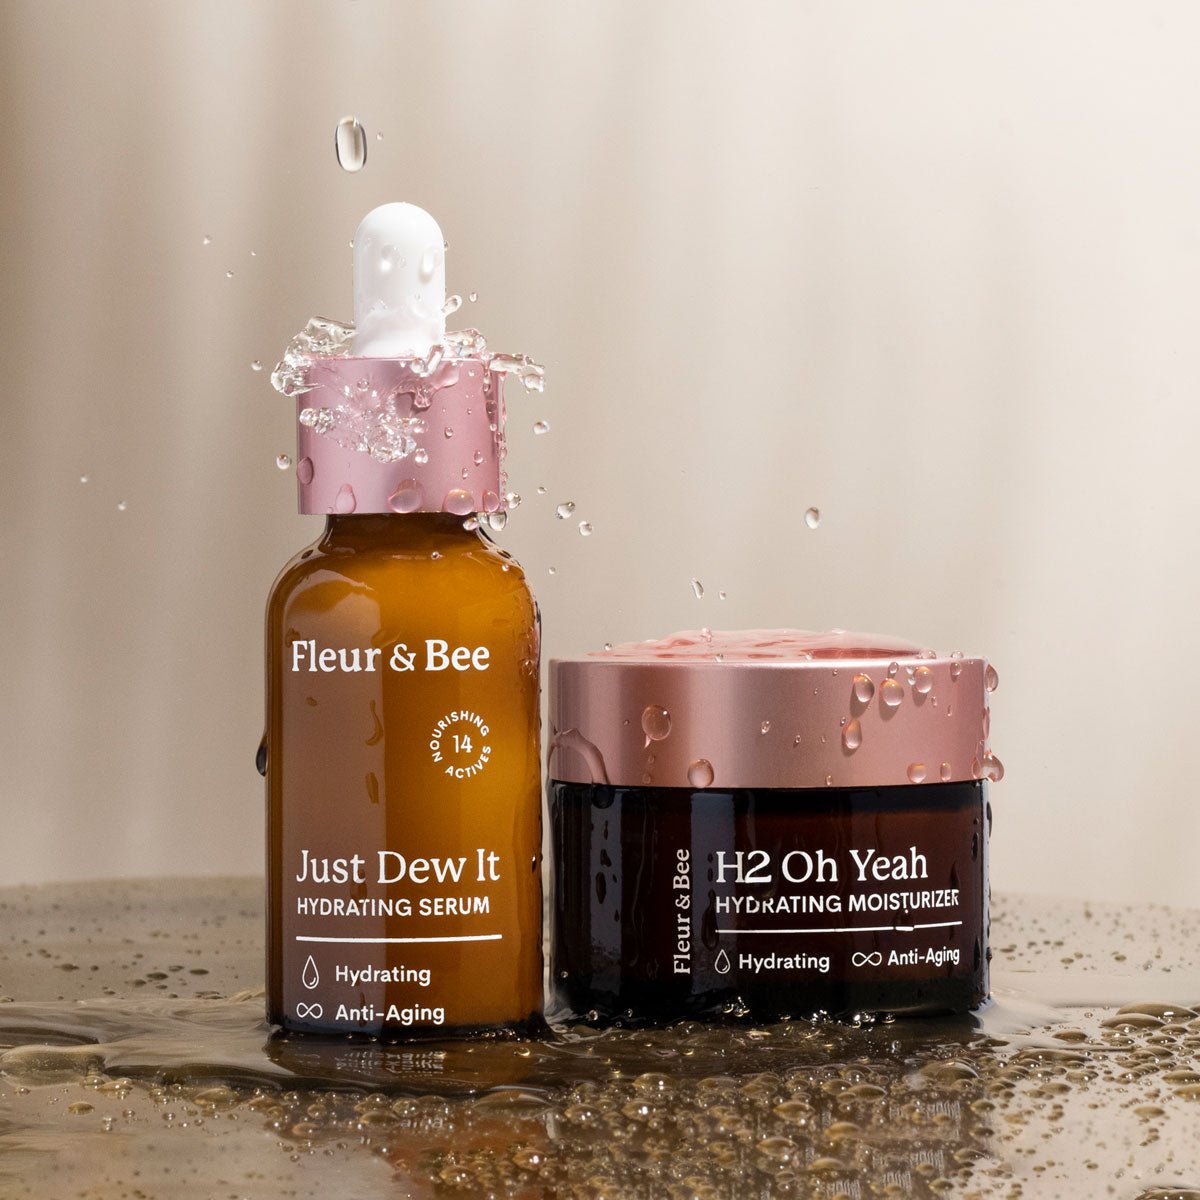 hydrating serum and hydrating moisturizer shown in a wet environment